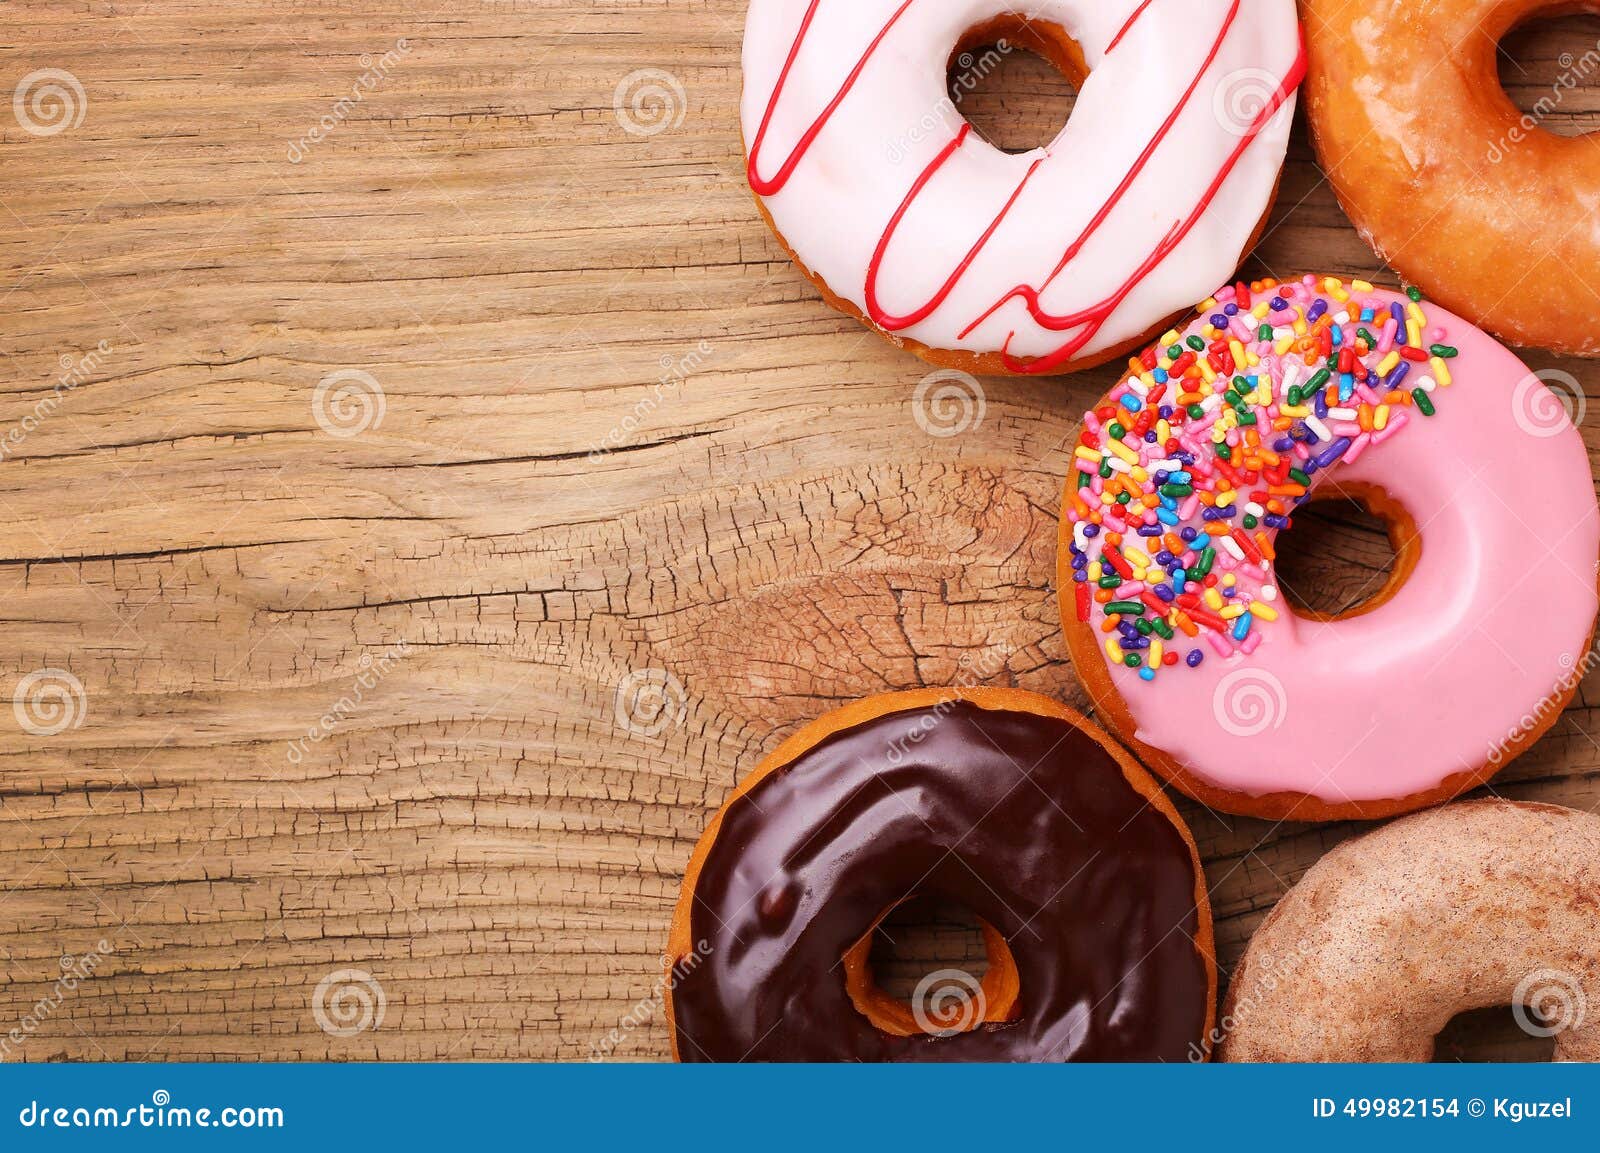 donuts on wooden background